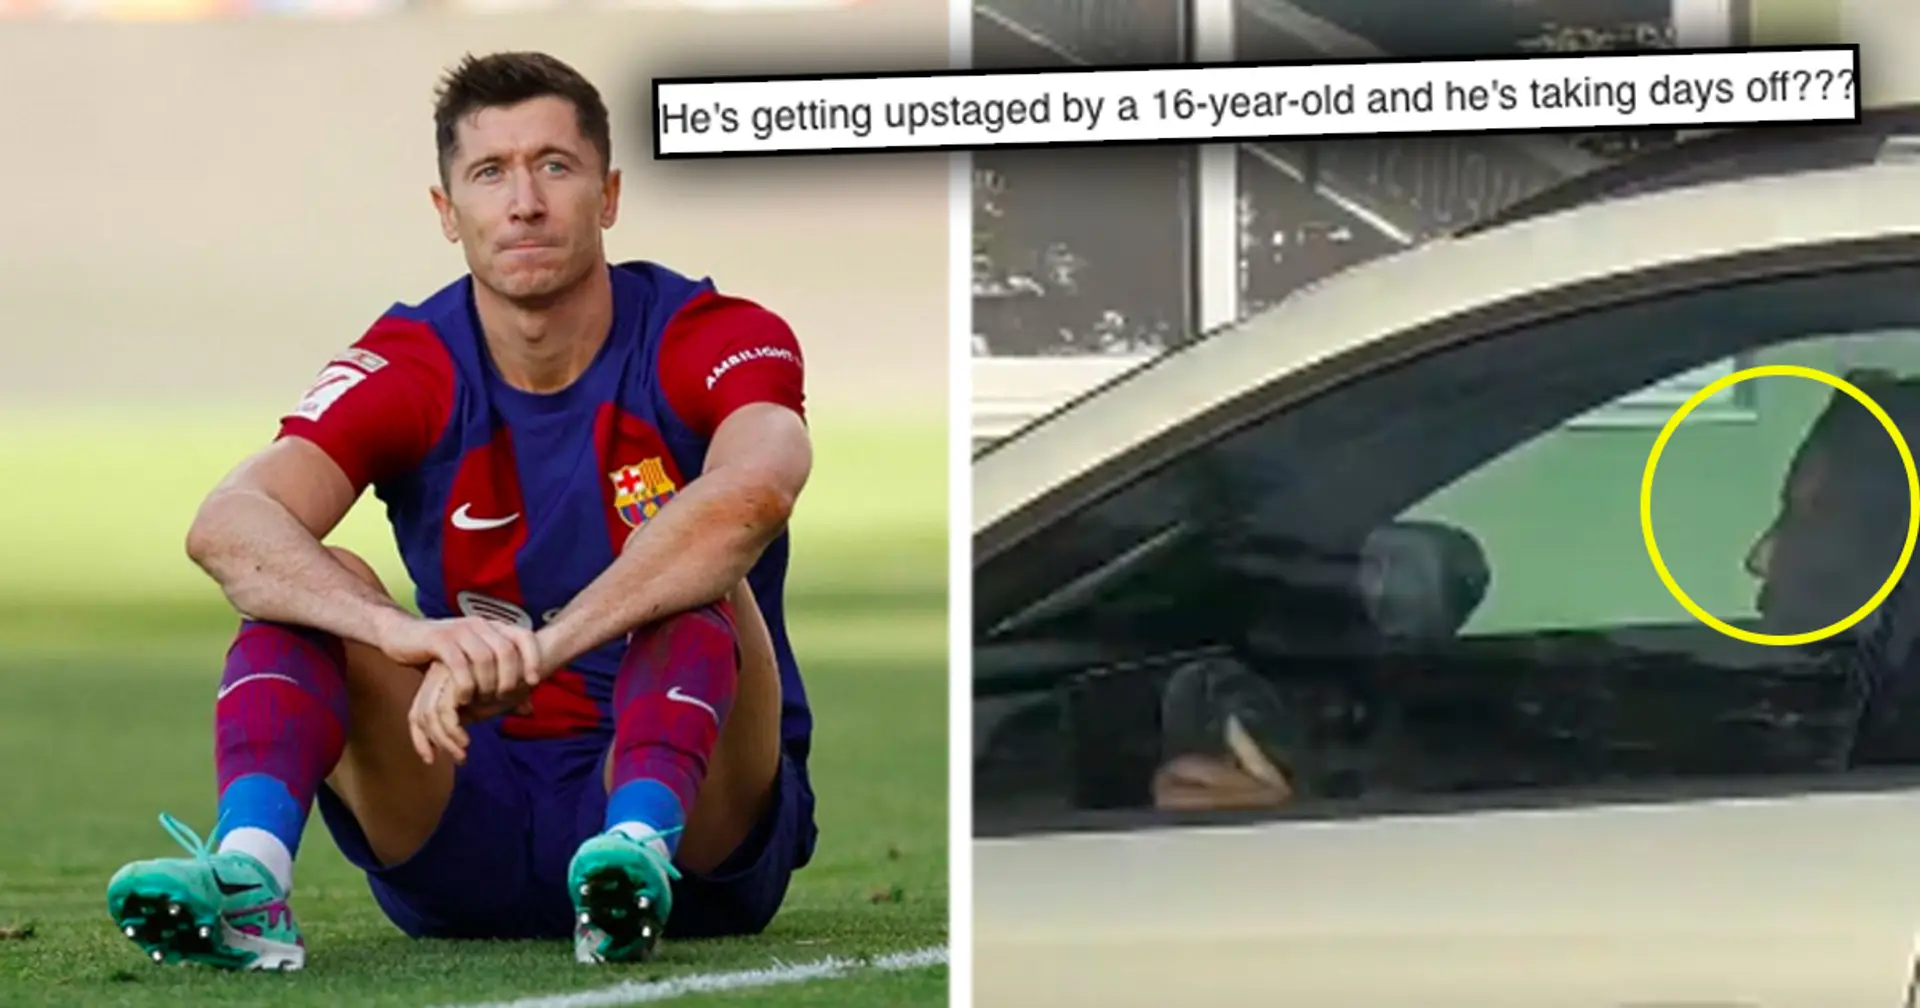 7 Barca players turn up for training despite day off – fans surprised two not among them